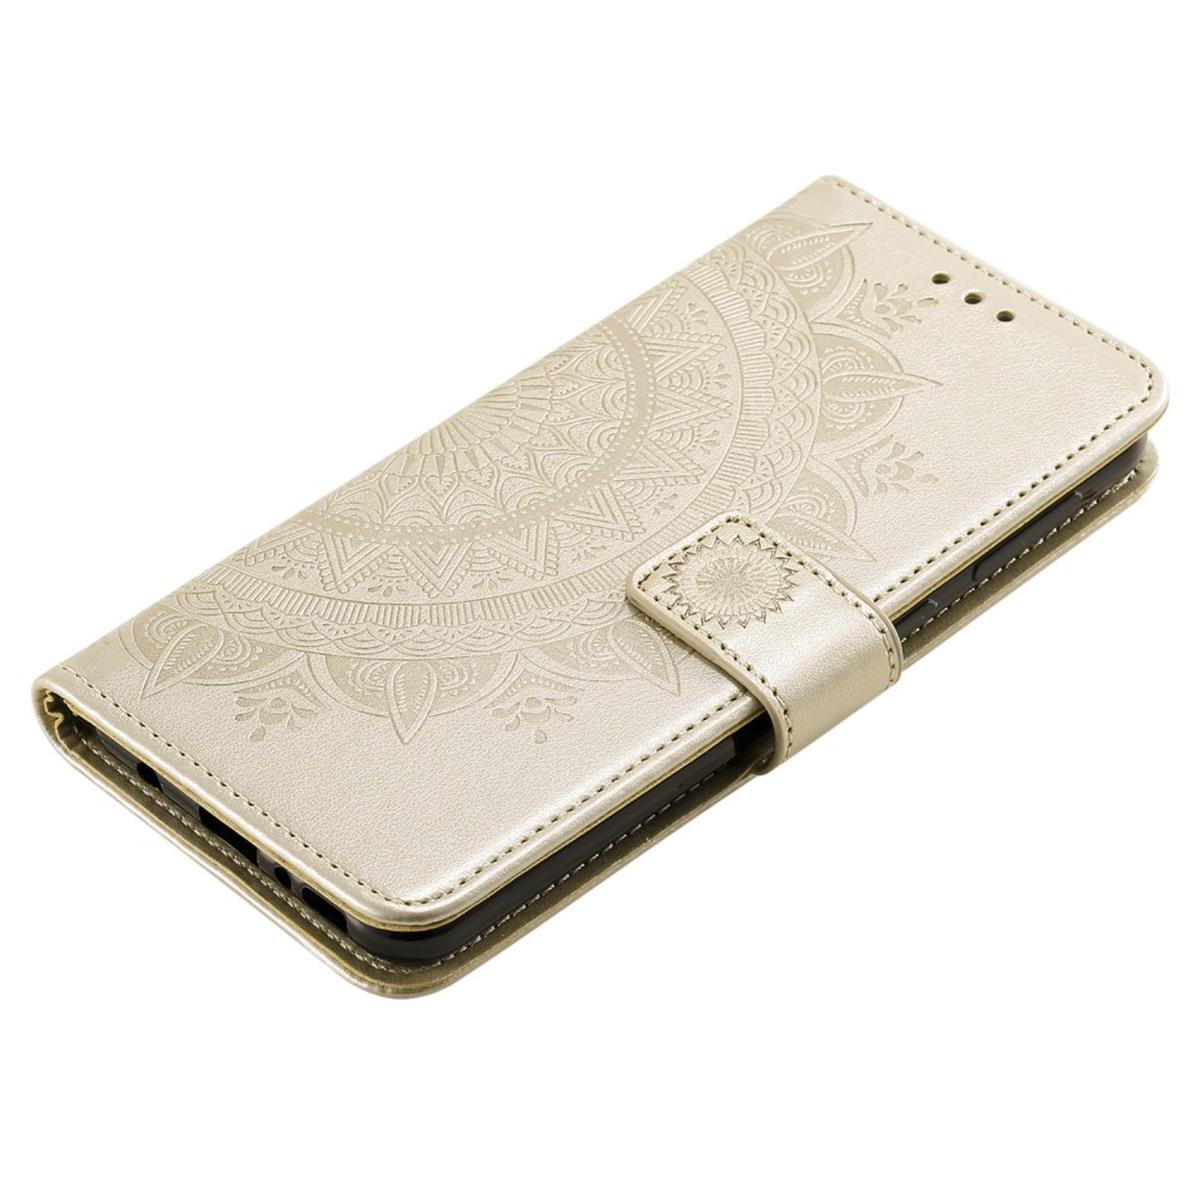 Mandala Bookcover, Huawei, Klapphülle mit Gold COVERKINGZ Muster, P 2020, Smart